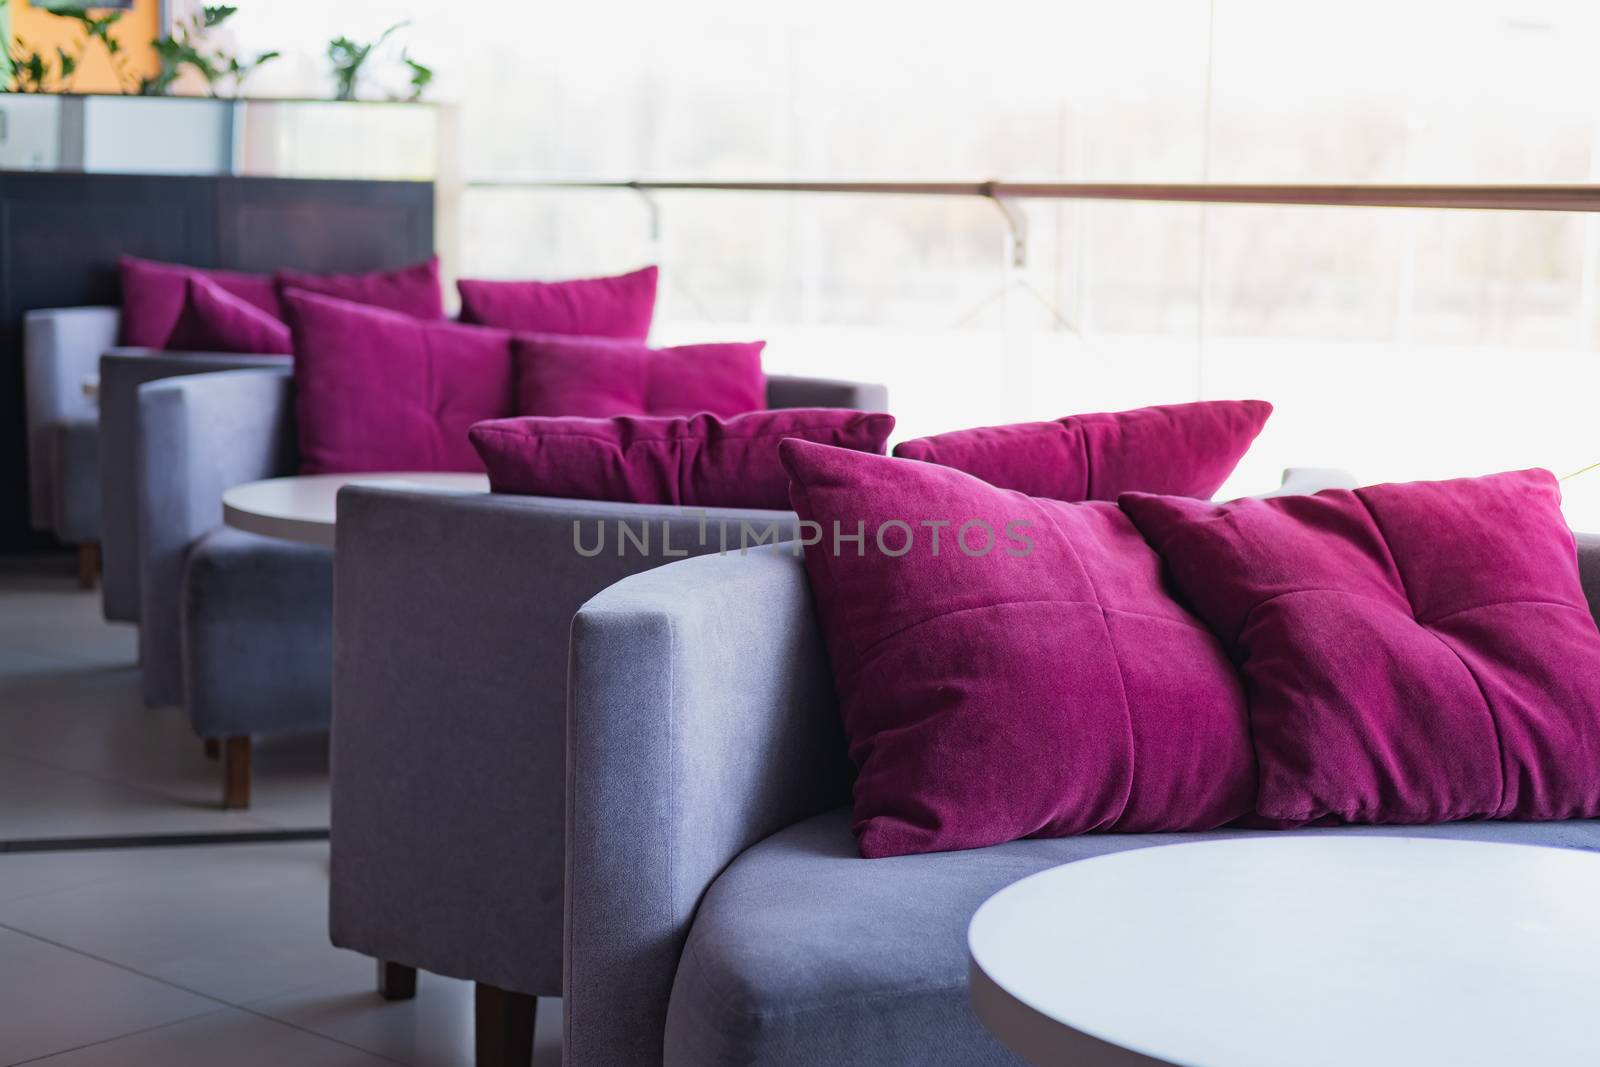 Empty cushions and sofas at a generic cafe. by photoboyko